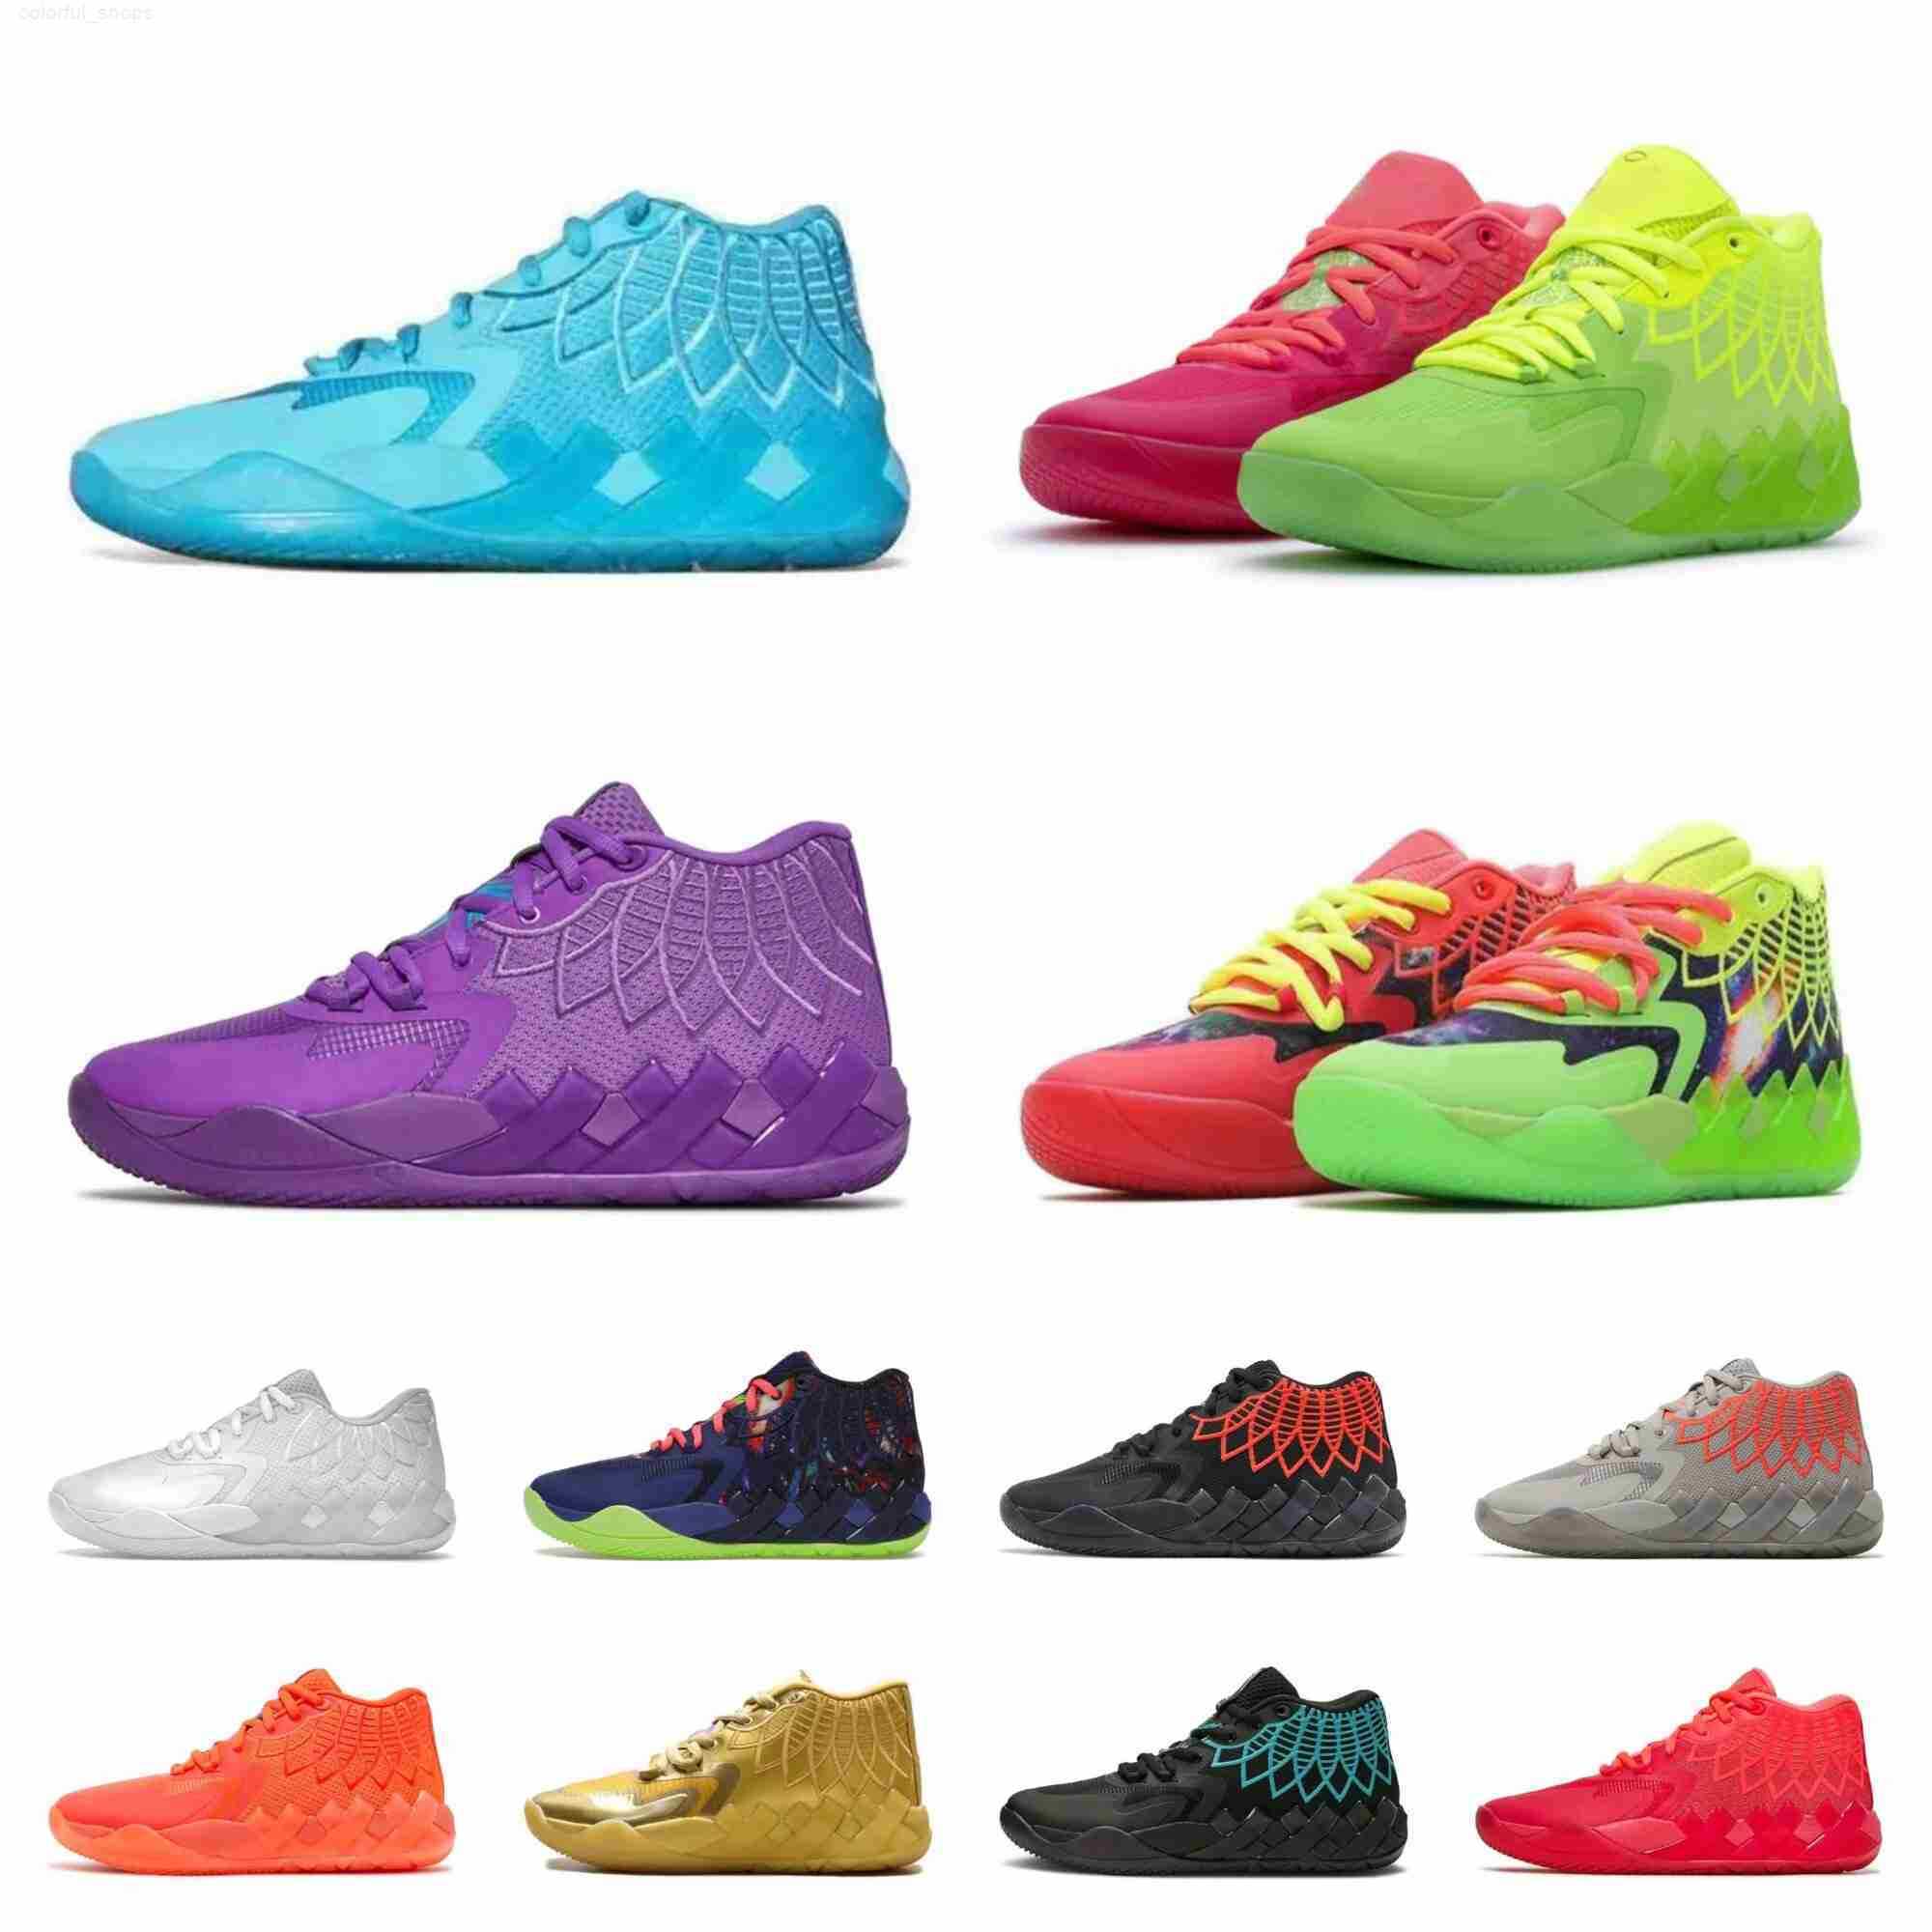 

Top LaMelo Ball 1 MB.01 Men Basketball Shoes Sneaker Black Blast Buzz City LO UFO Not From Here Queen City Rick and Morty Rock Ridge Red Mens Trainers Sports Sneakers 39-46, Y010